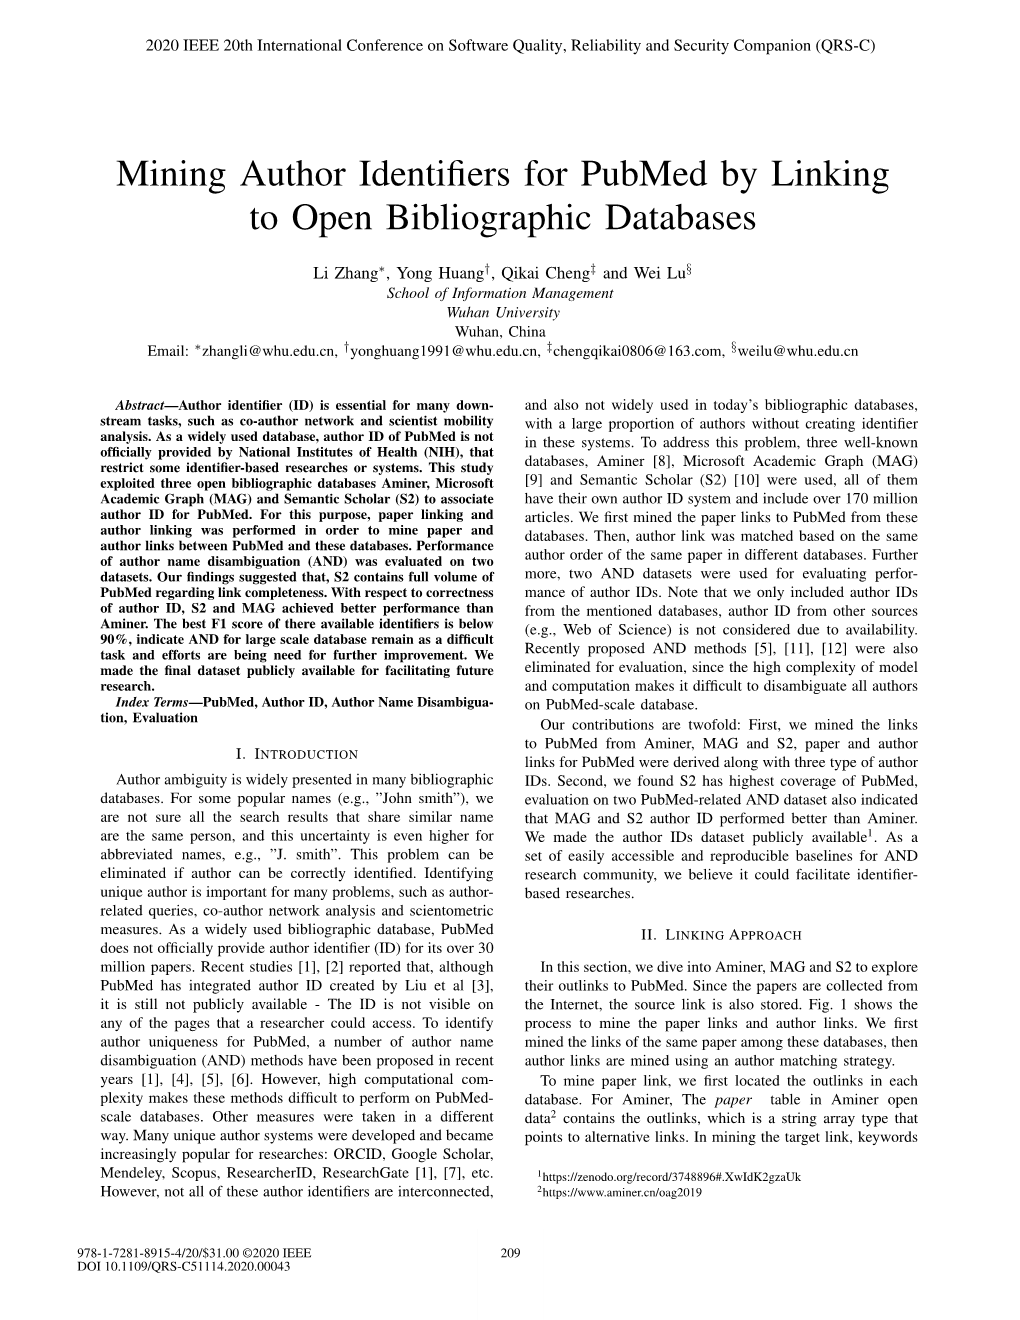 Mining Author Identifiers for Pubmed by Linking to Open Bibliographic Databases